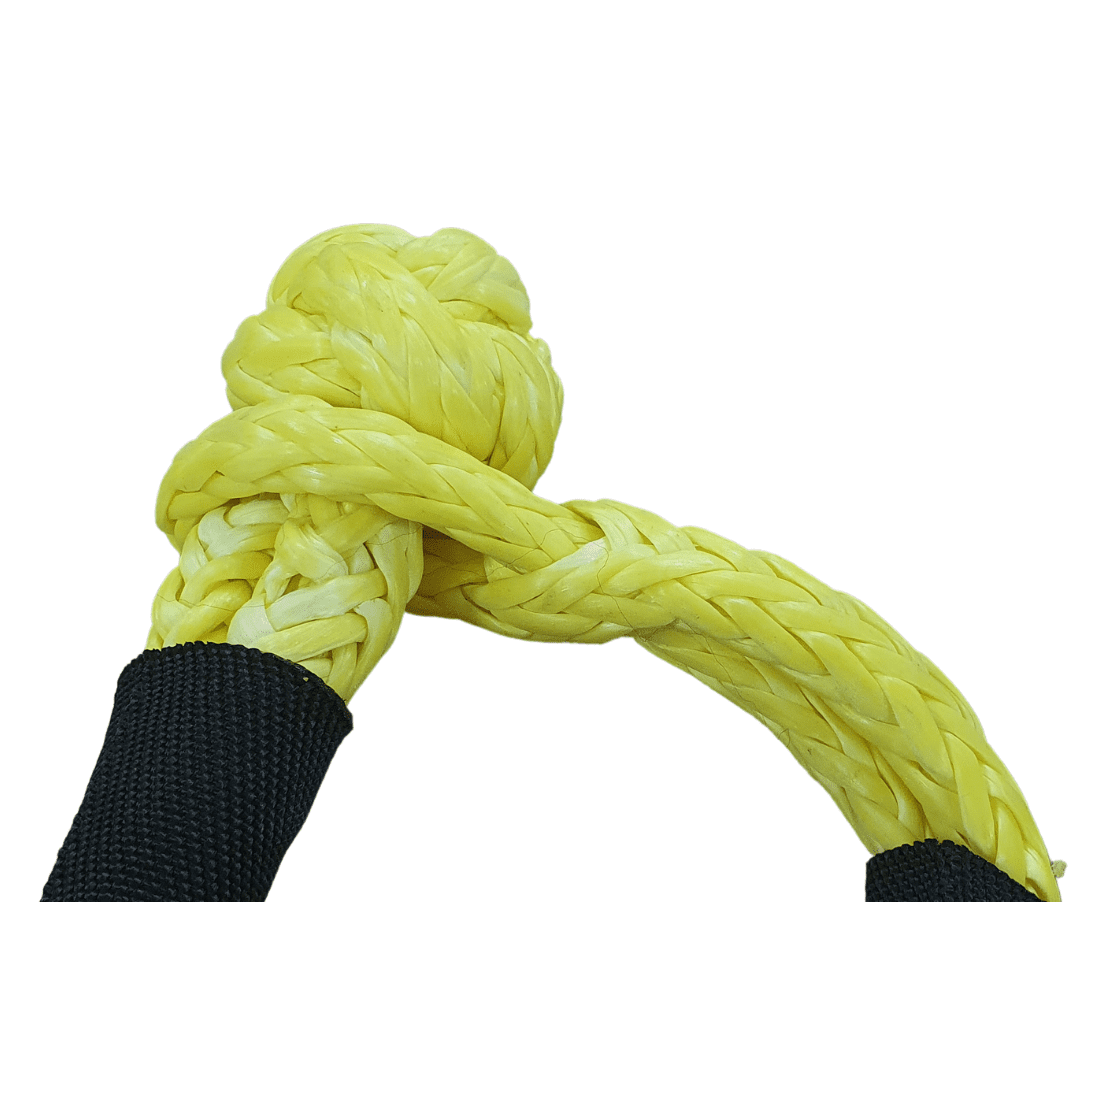 Soft shackle 8mm x 460mm YELLOW UHMWPE with 9384kgs MBL - Damar Webbing Solutions Ltd